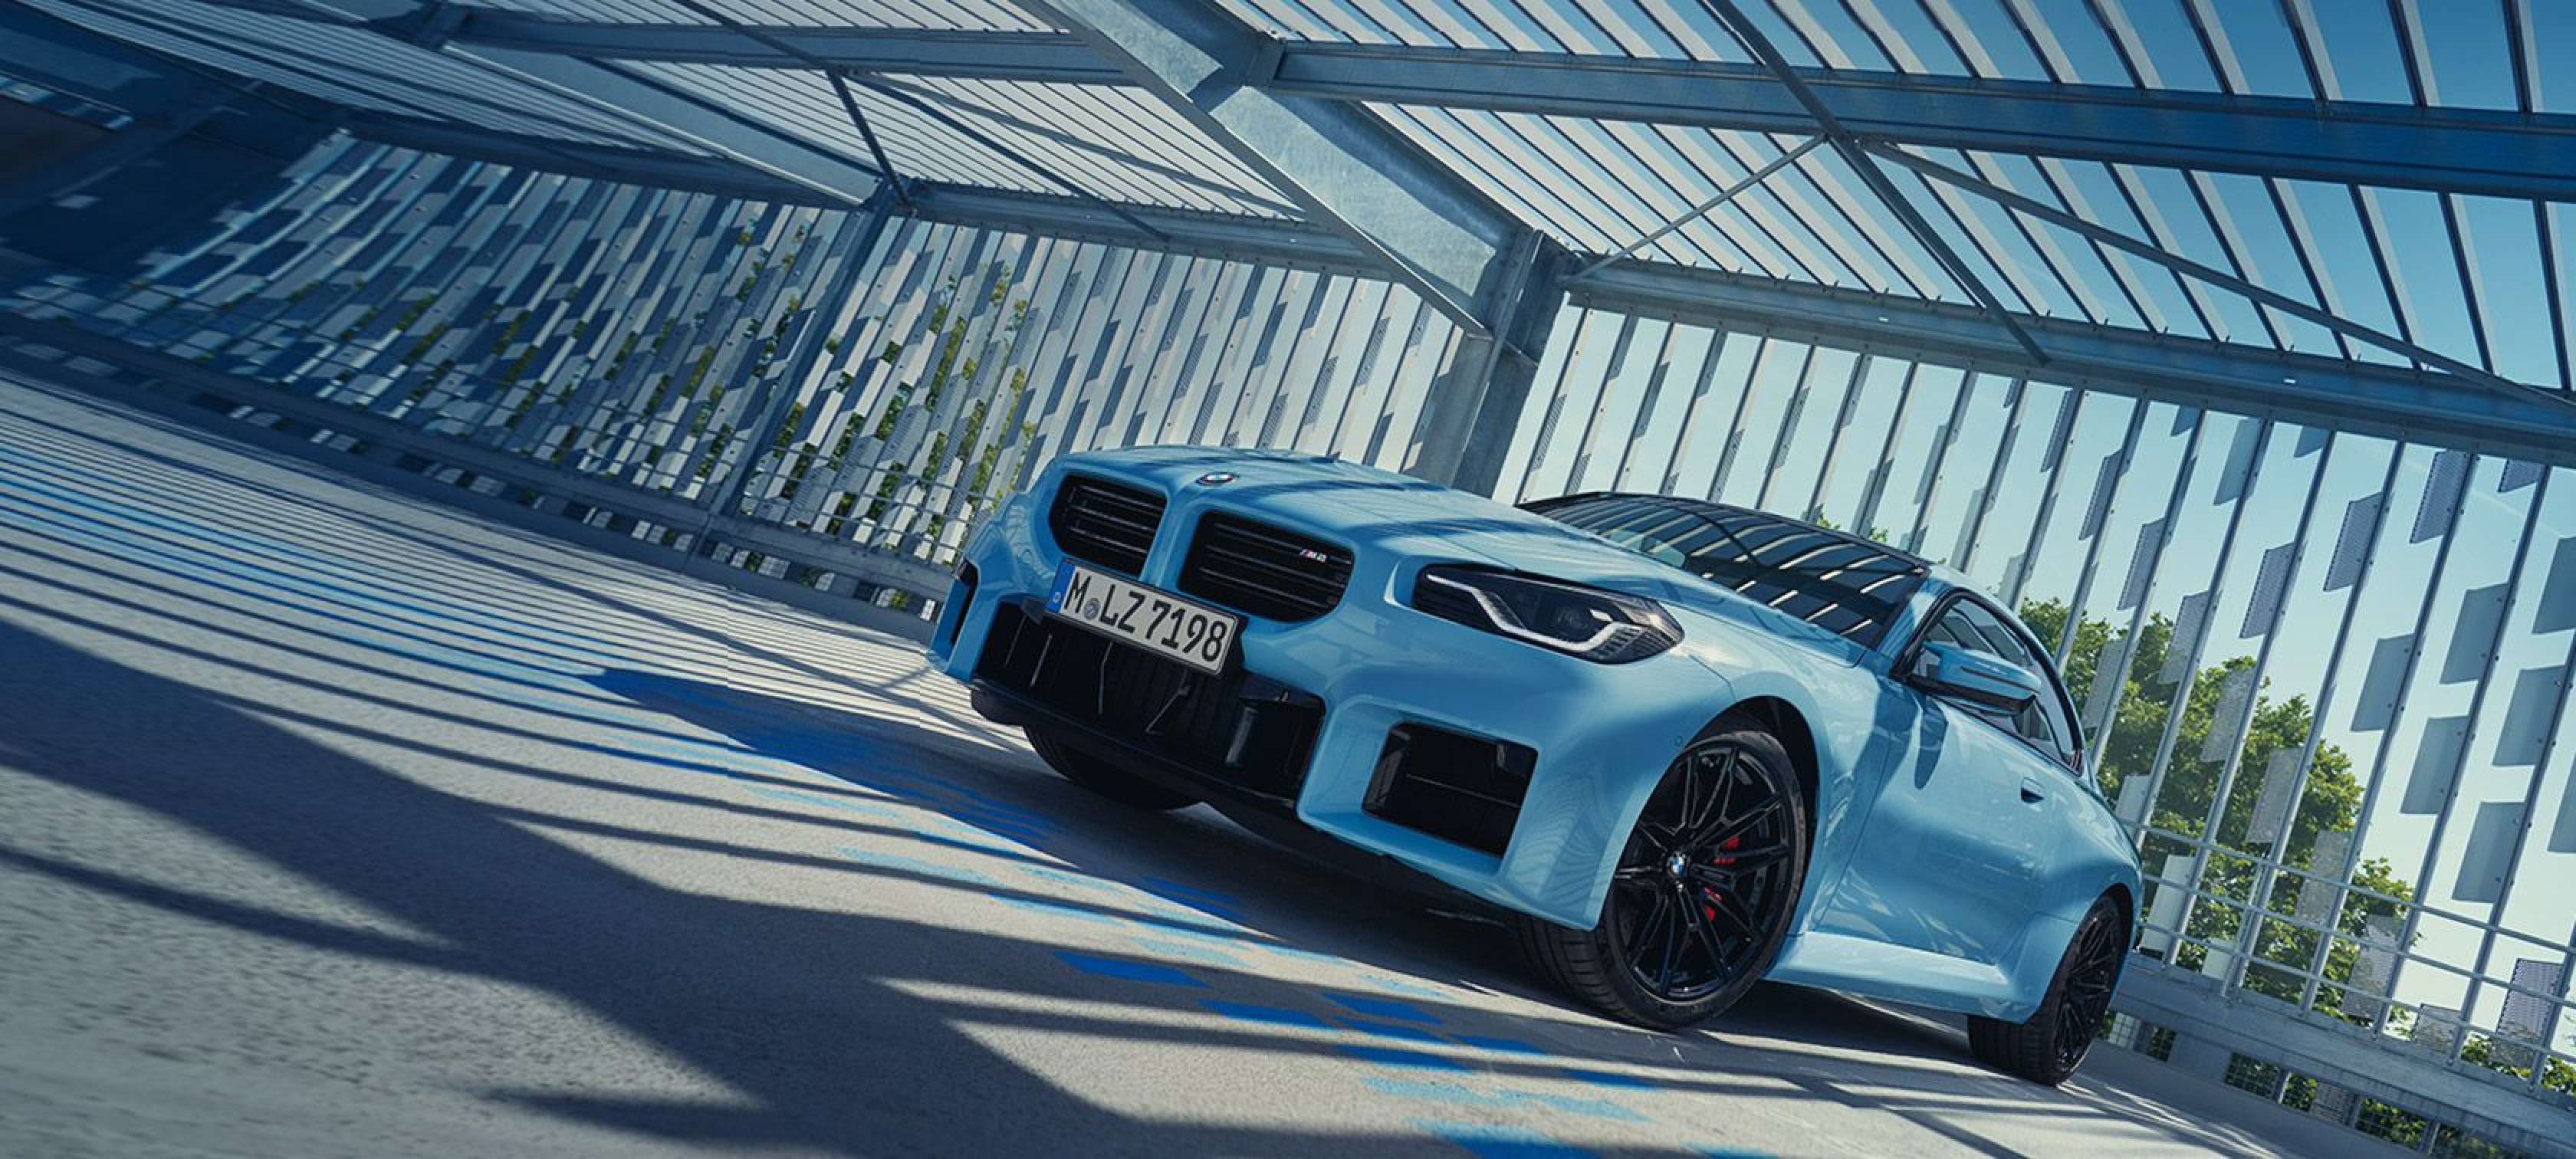 m2coupe